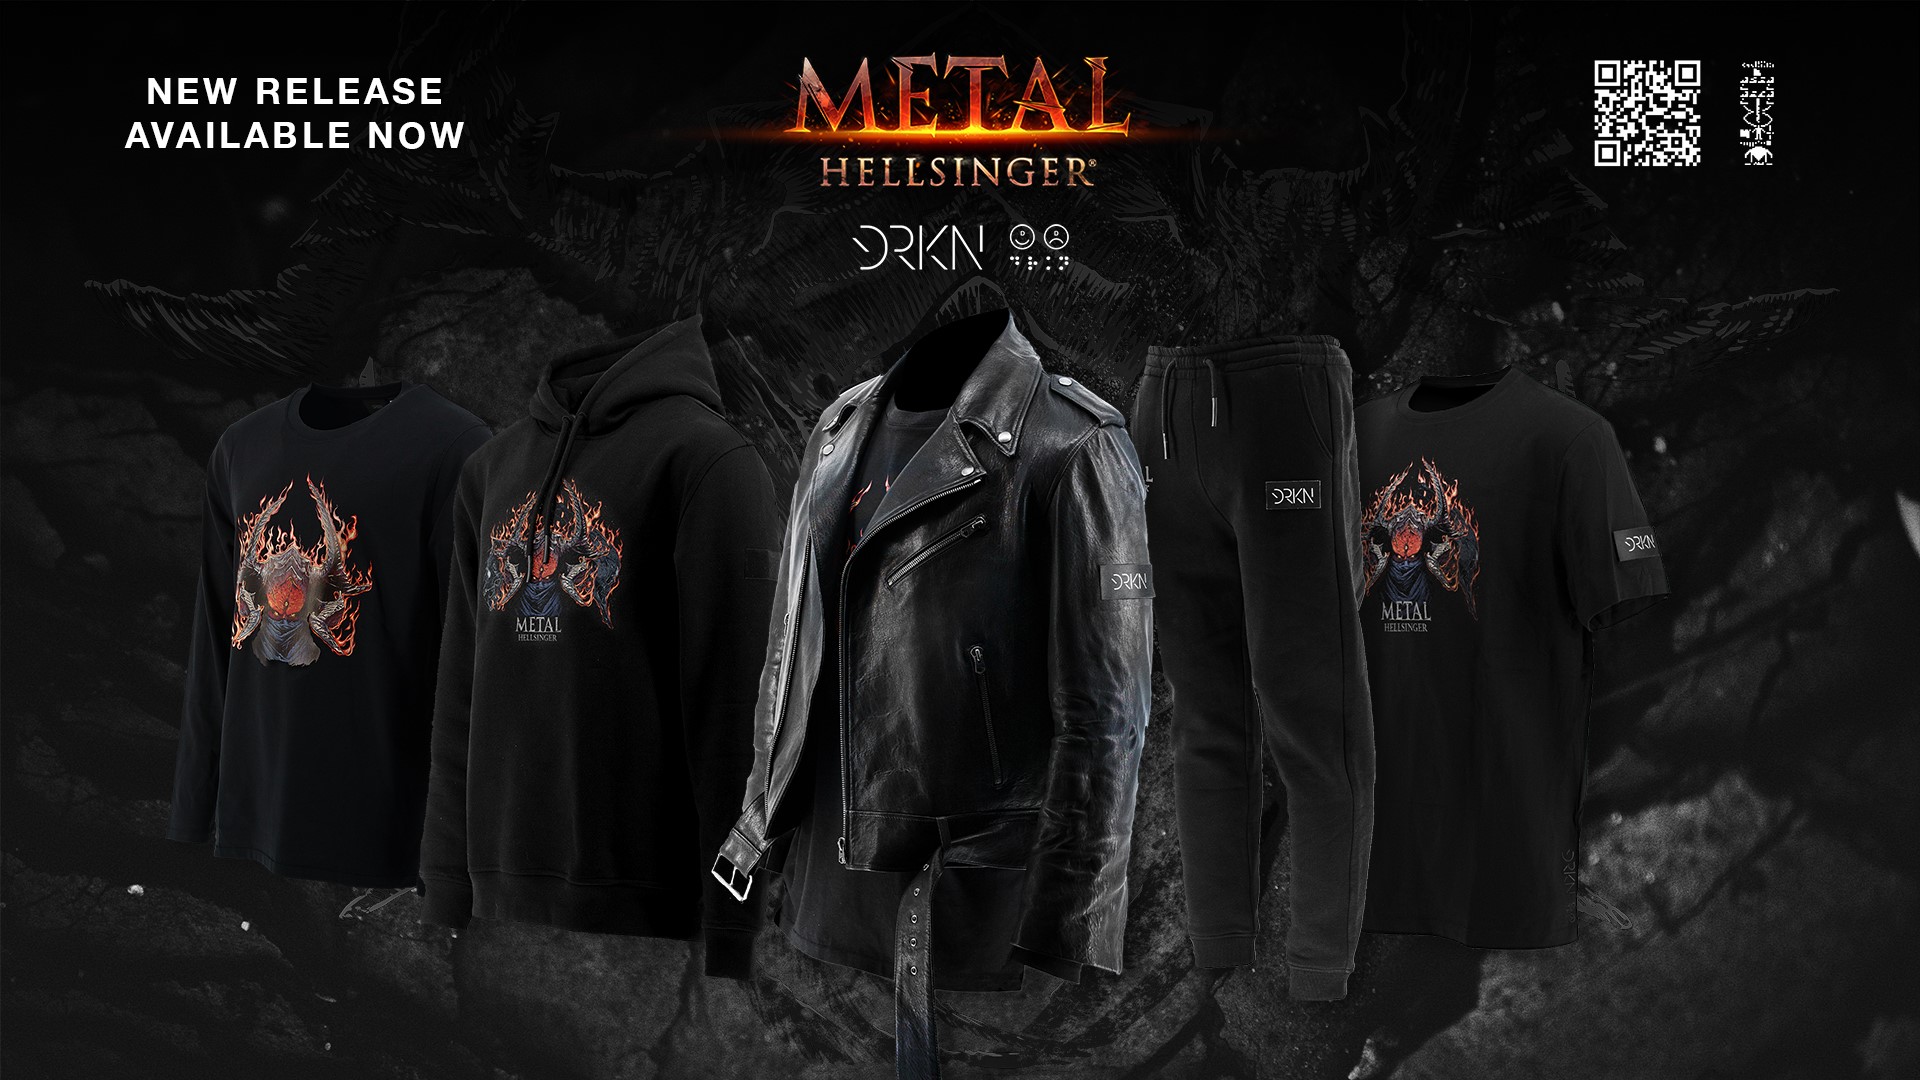 The hugely anticipated Metal: Hellsinger is now available